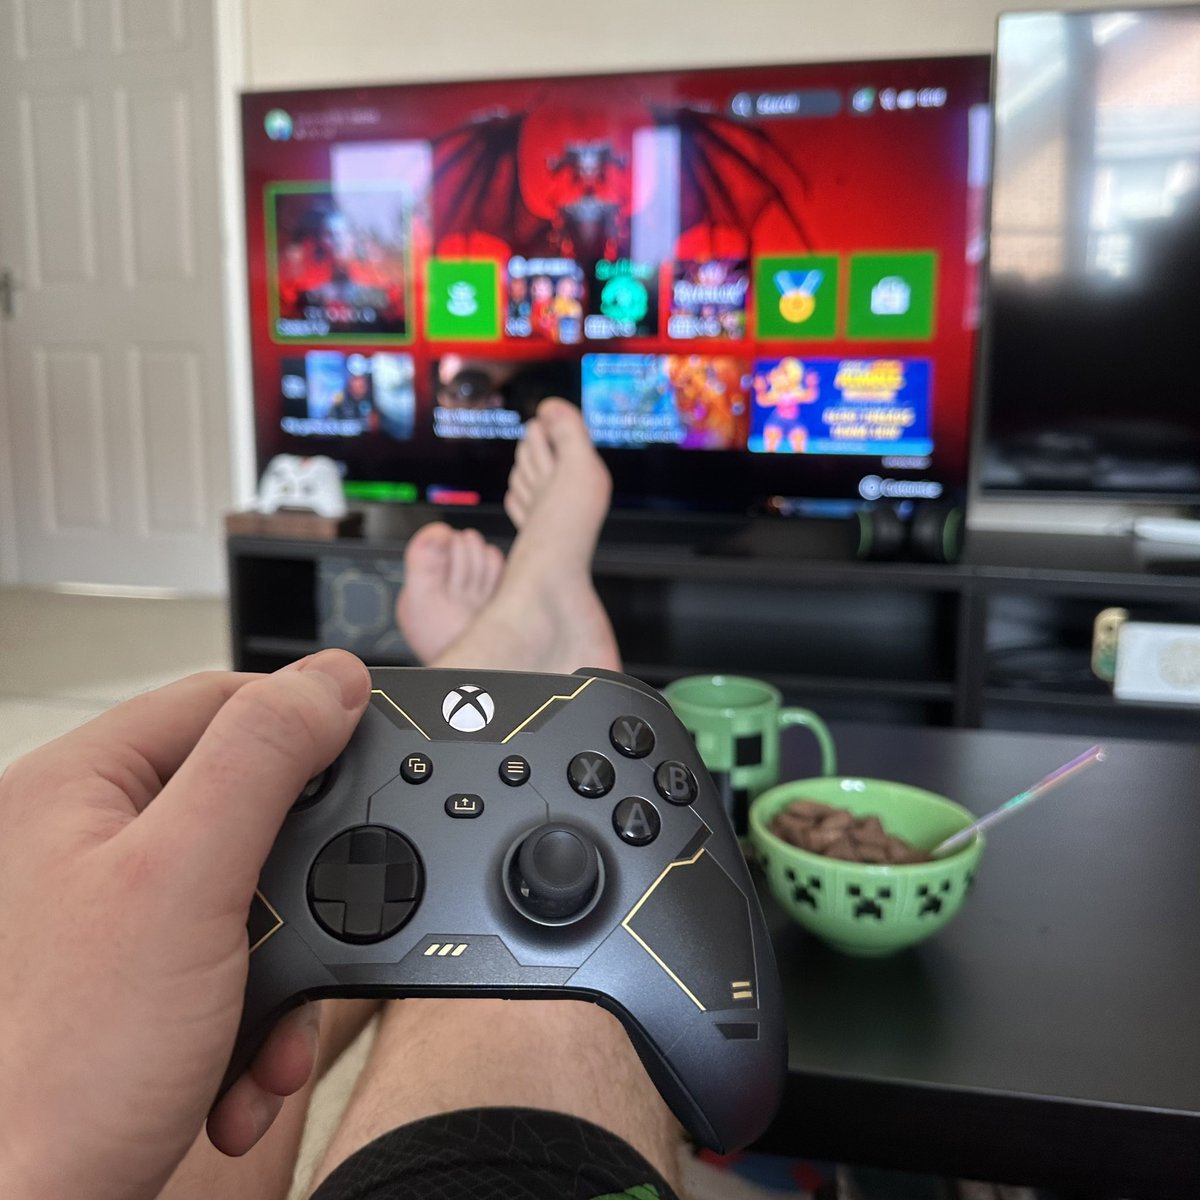 Happy Father’s Day to all the Dads out there 💚 It’s been a productive weekend so far, but I can’t wait to relax, play some games and watch the F1 today 🤓 What are your plans? ☺️ #Xbox